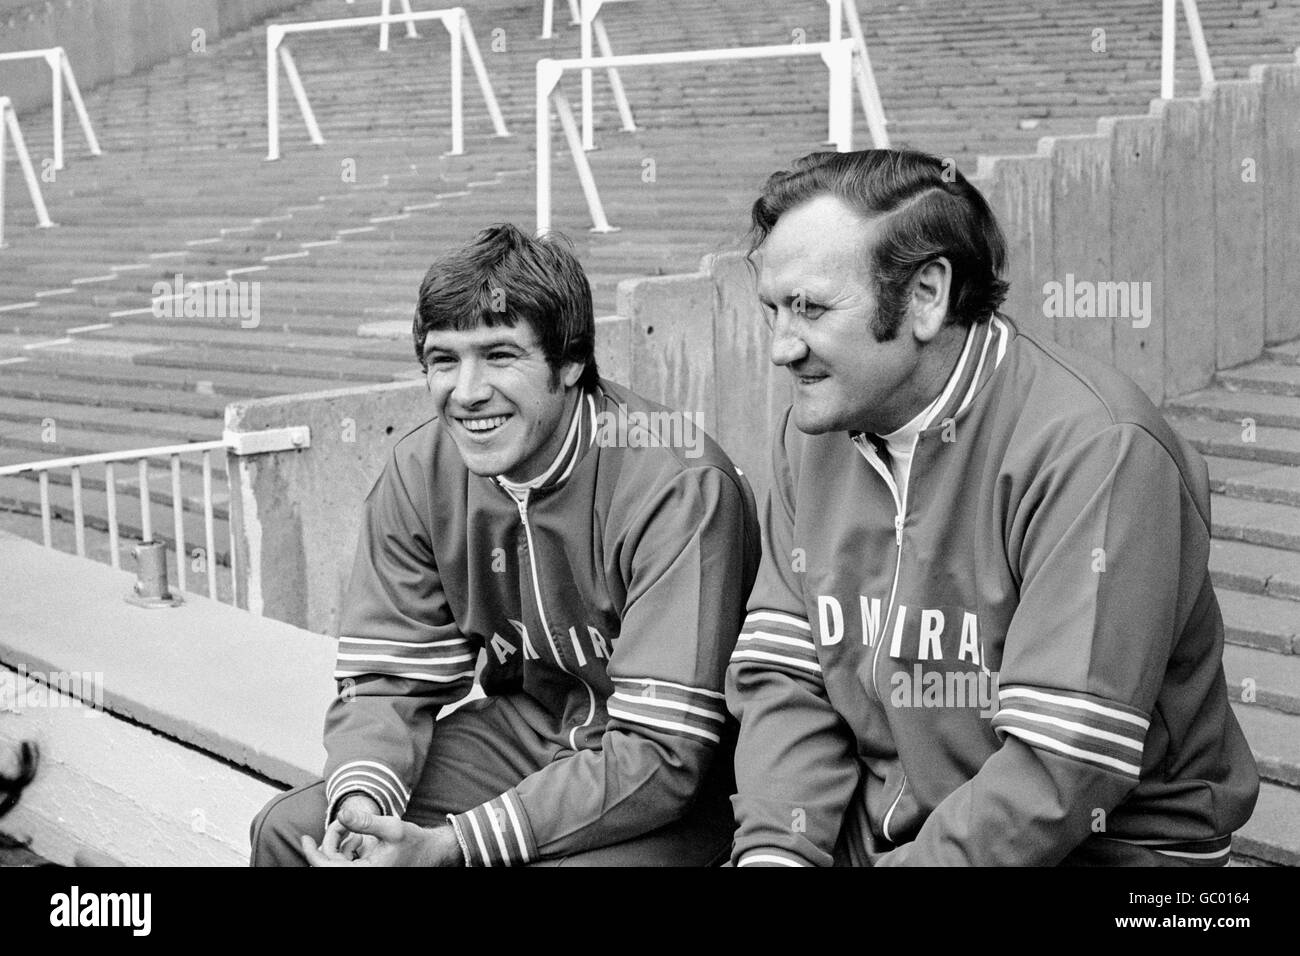 Soccer - European Championship Qualifier - Group One - England v Czechoslovakia - England Training. England captain Emlyn Hughes (l) and manager Don Revie (r) Stock Photo